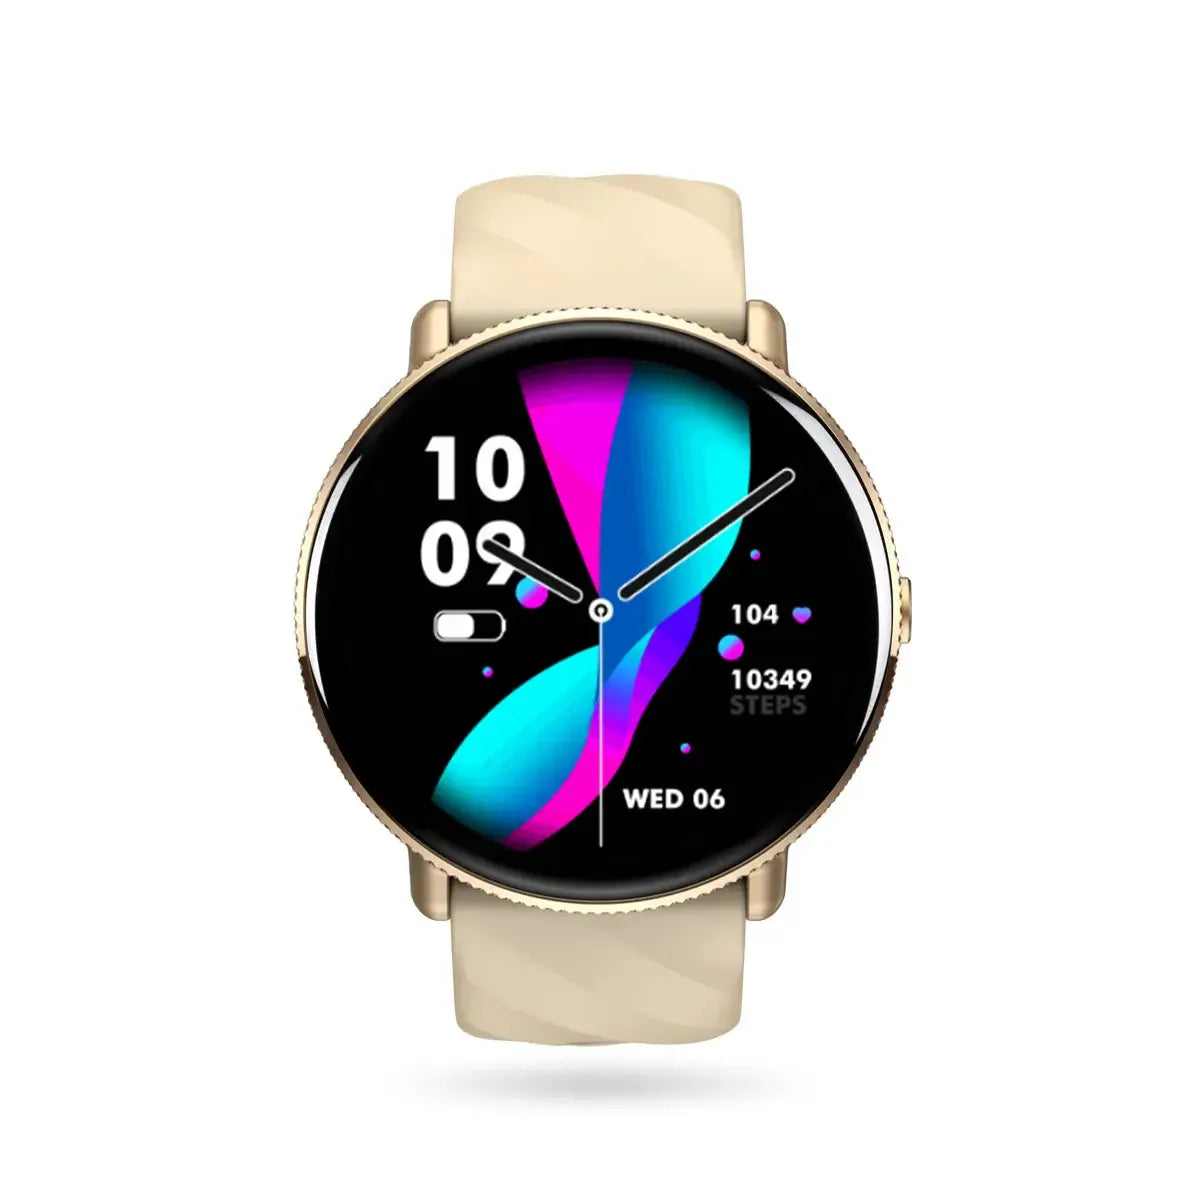 Tousains smartwatch P2 in gold